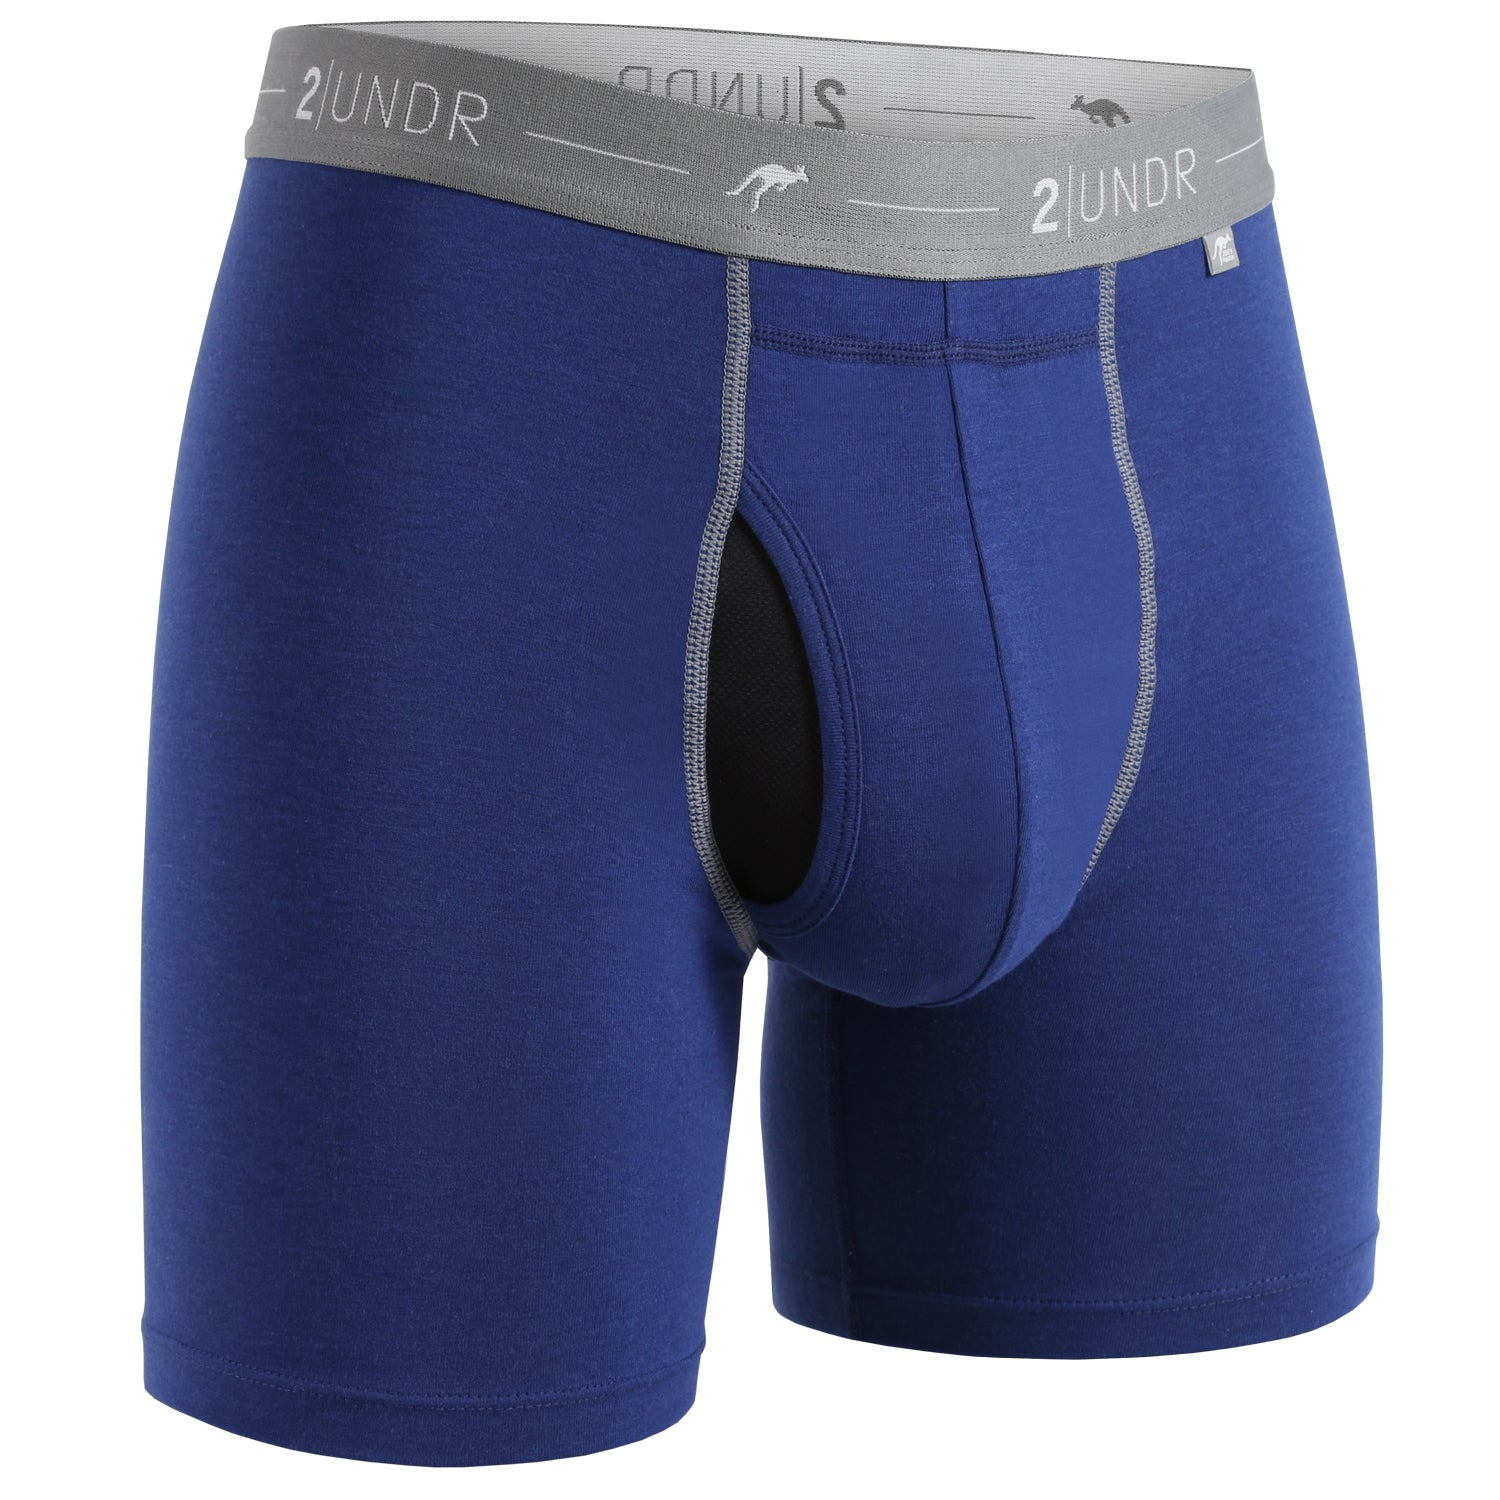 2Undr Day Shift Boxer Brief Solid - Navy - My Filosophy